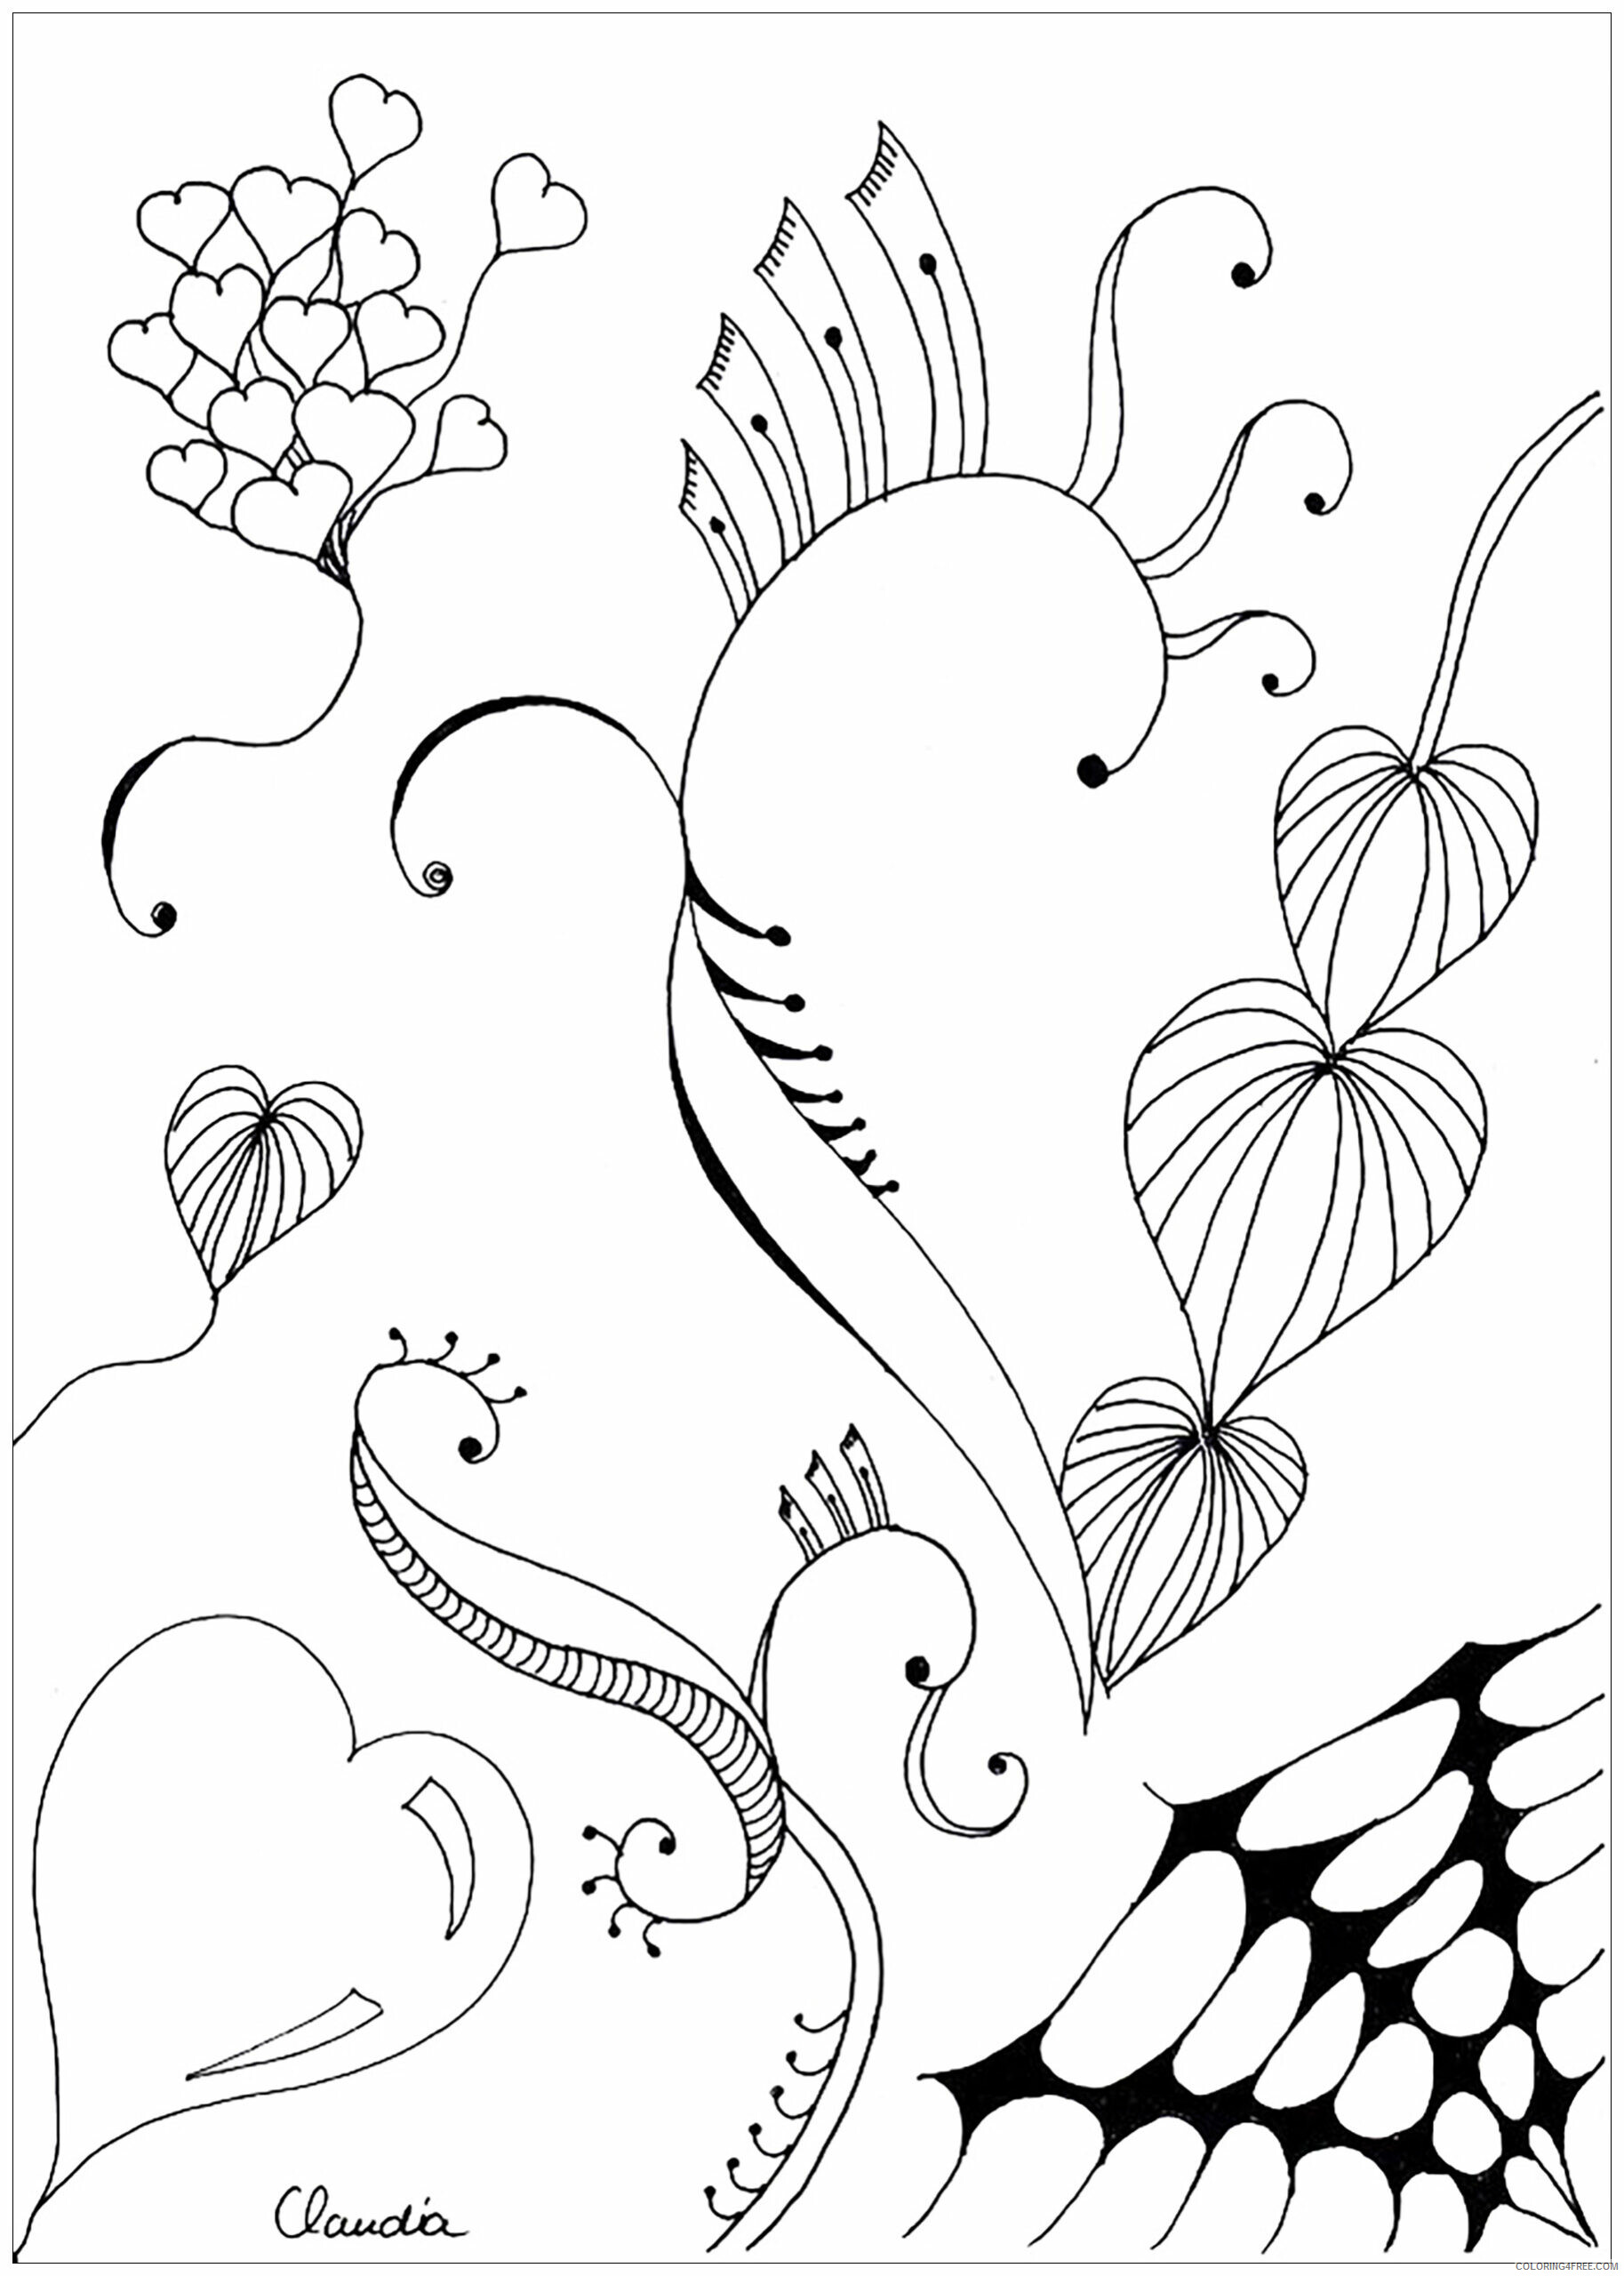 Adult Zentangle Coloring Pages adult zentangle simple by claudia 3 Printable 2020 121 Coloring4free